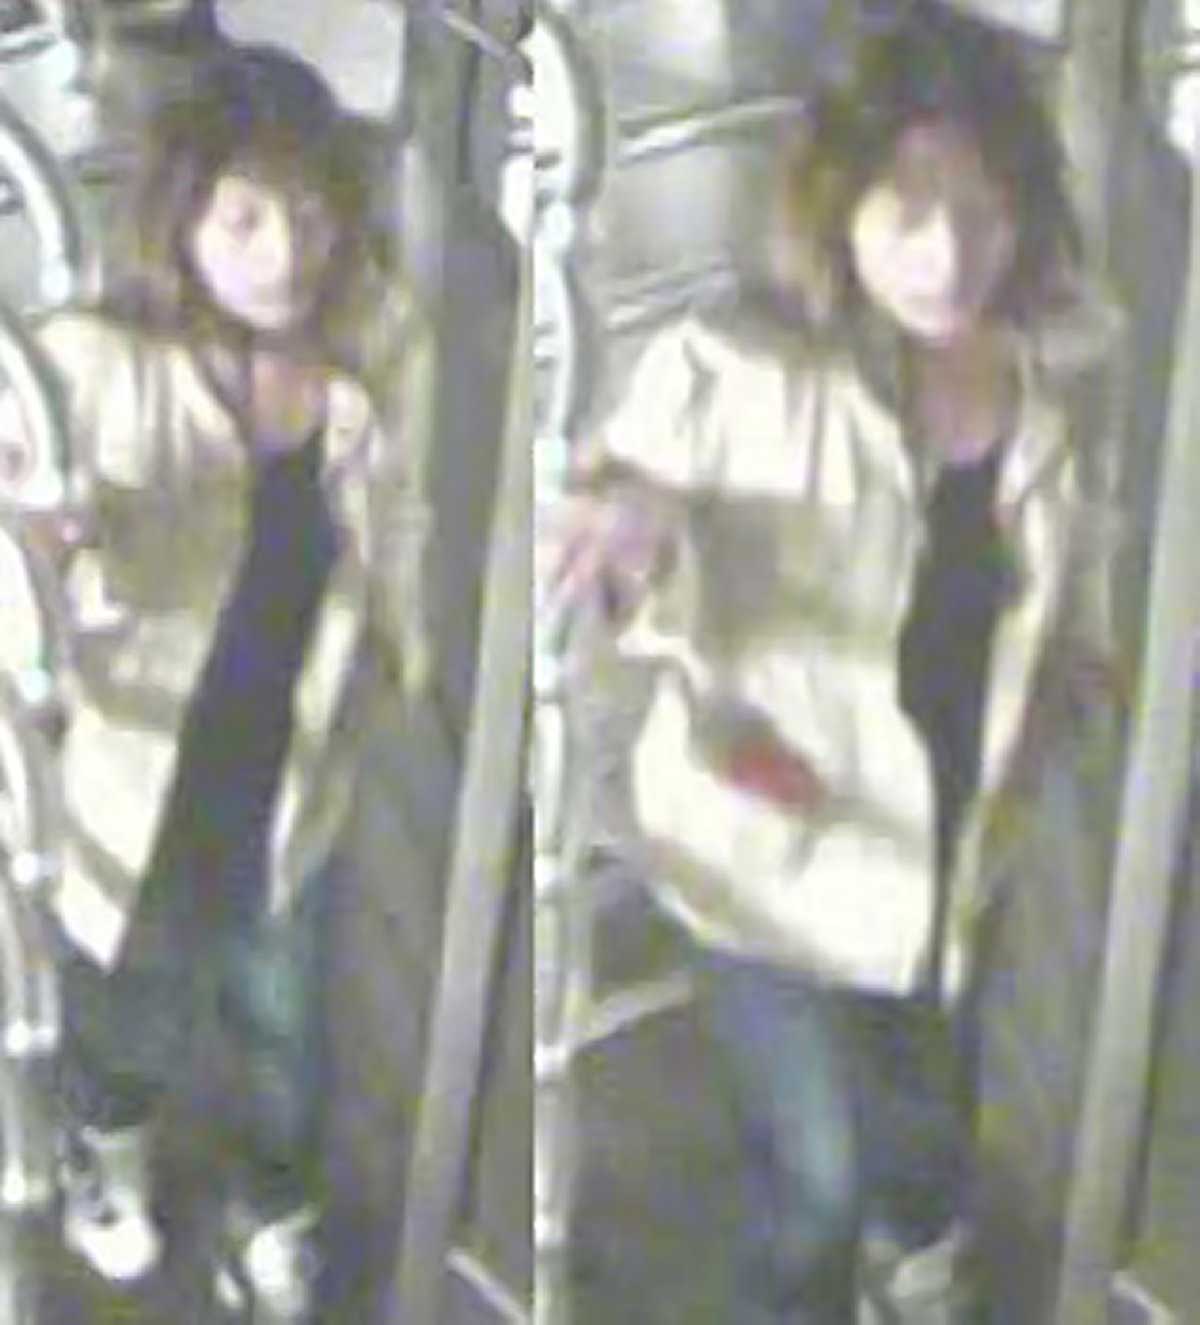 Police continue search for suspect wanted in connection with September J train attack